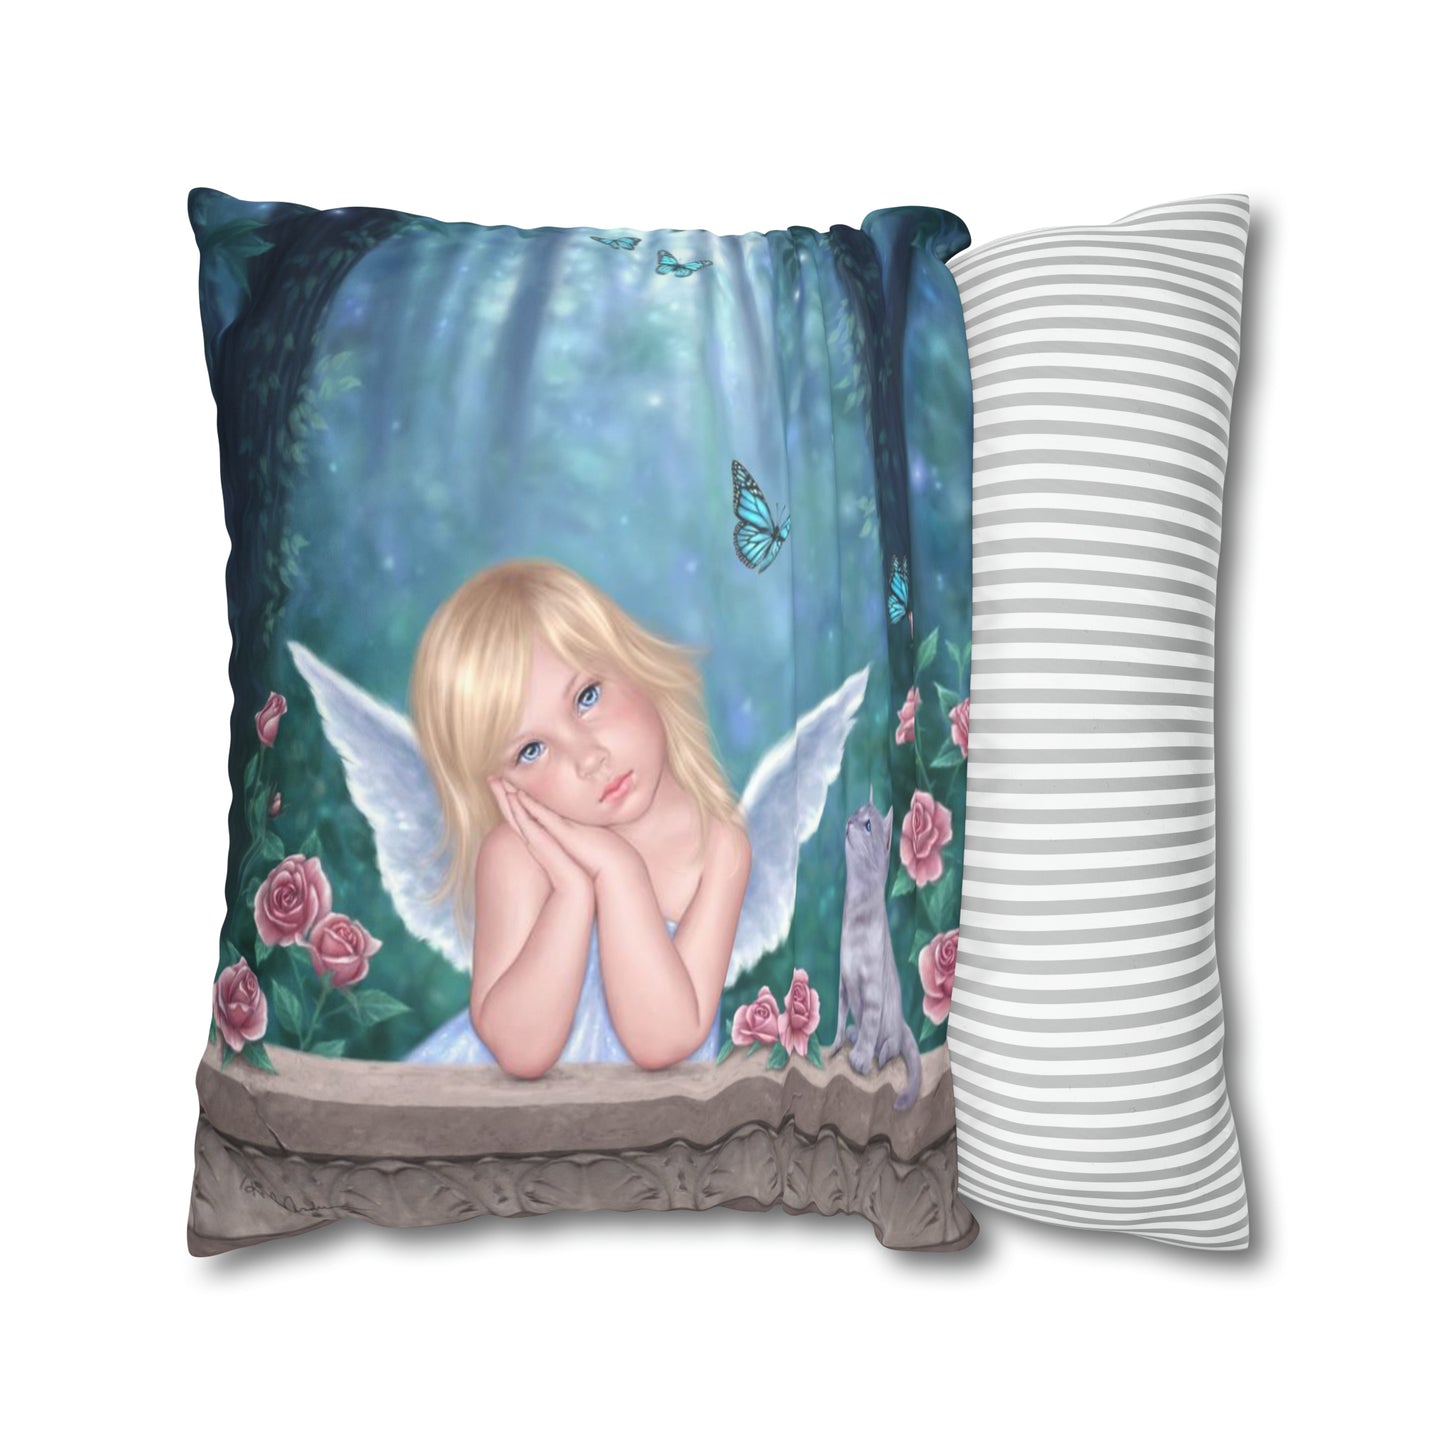 Throw Pillow Cover - Little Miracles